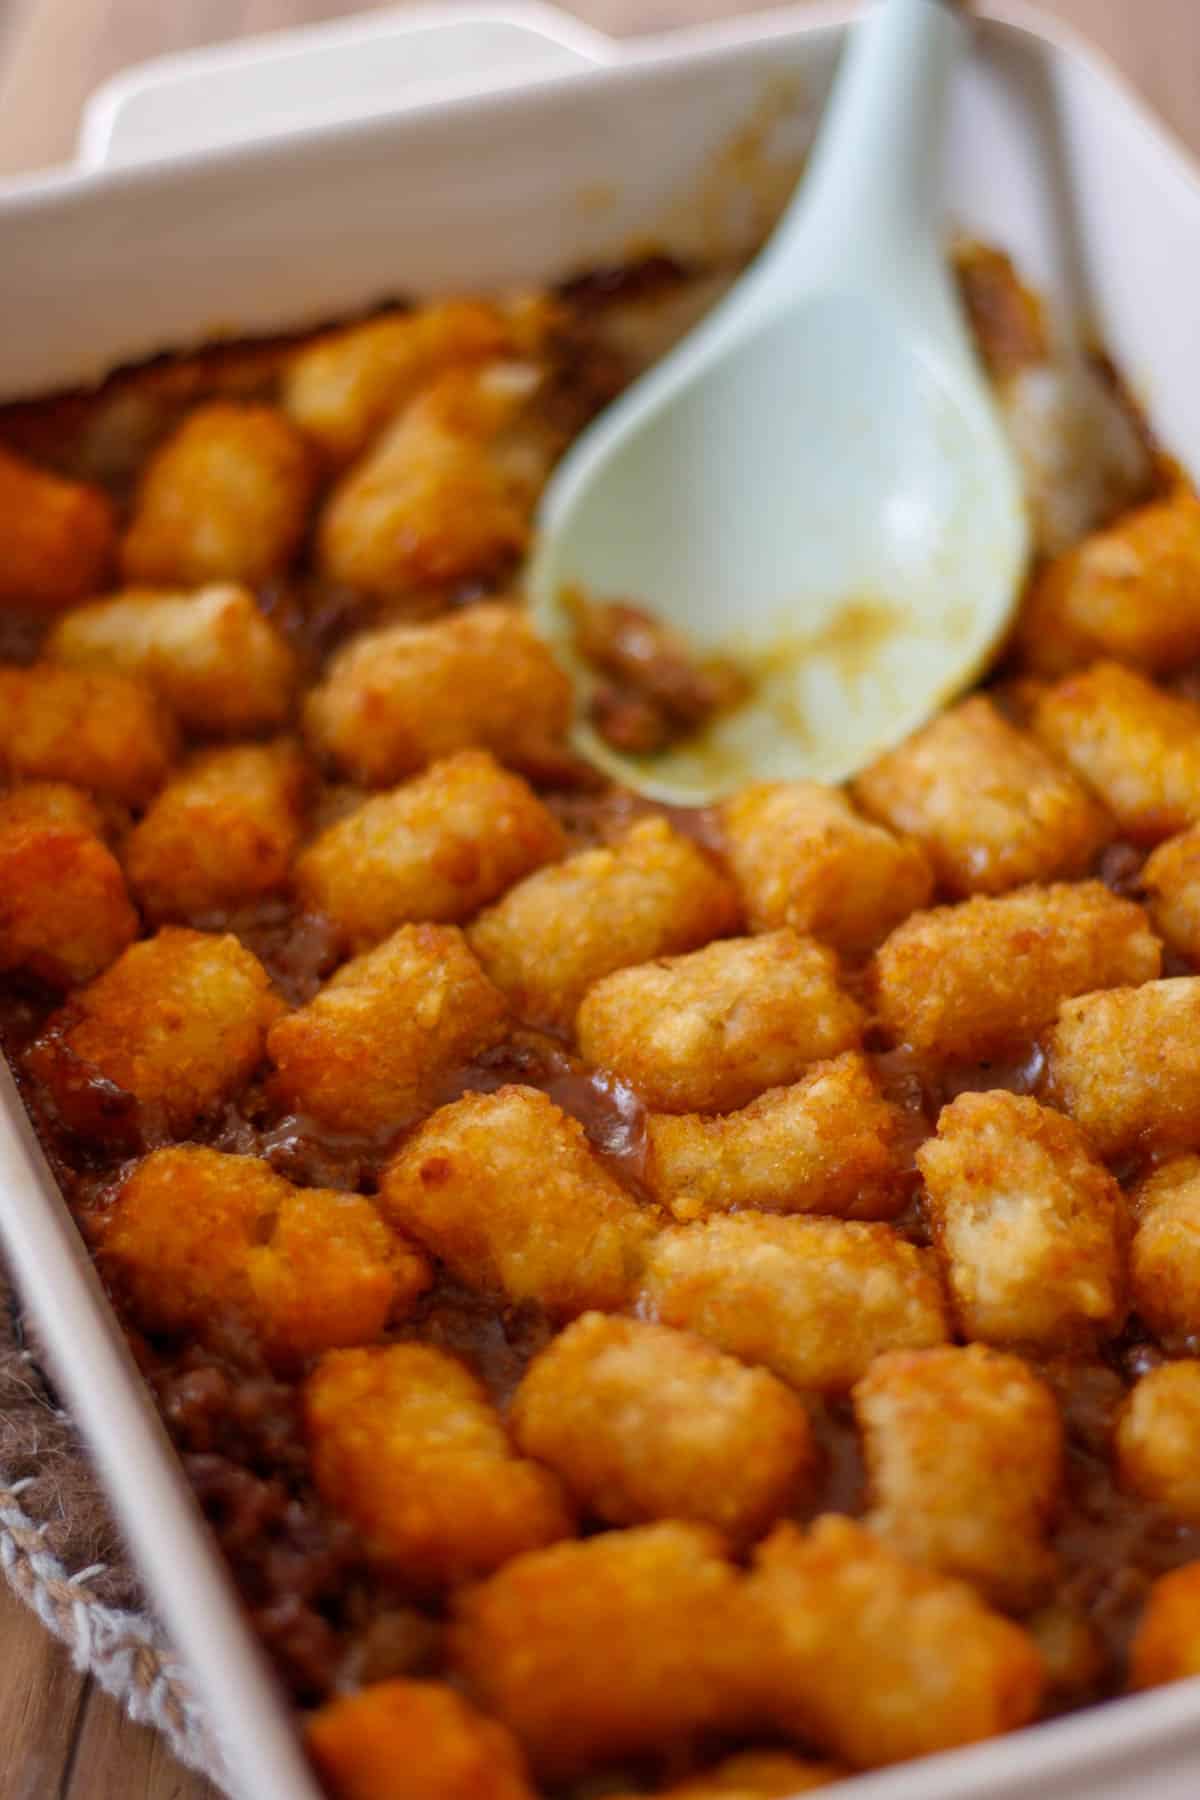 A casserole dish containing a tater tot casserole with ground beef. There is a blue spoon resting in the dish.